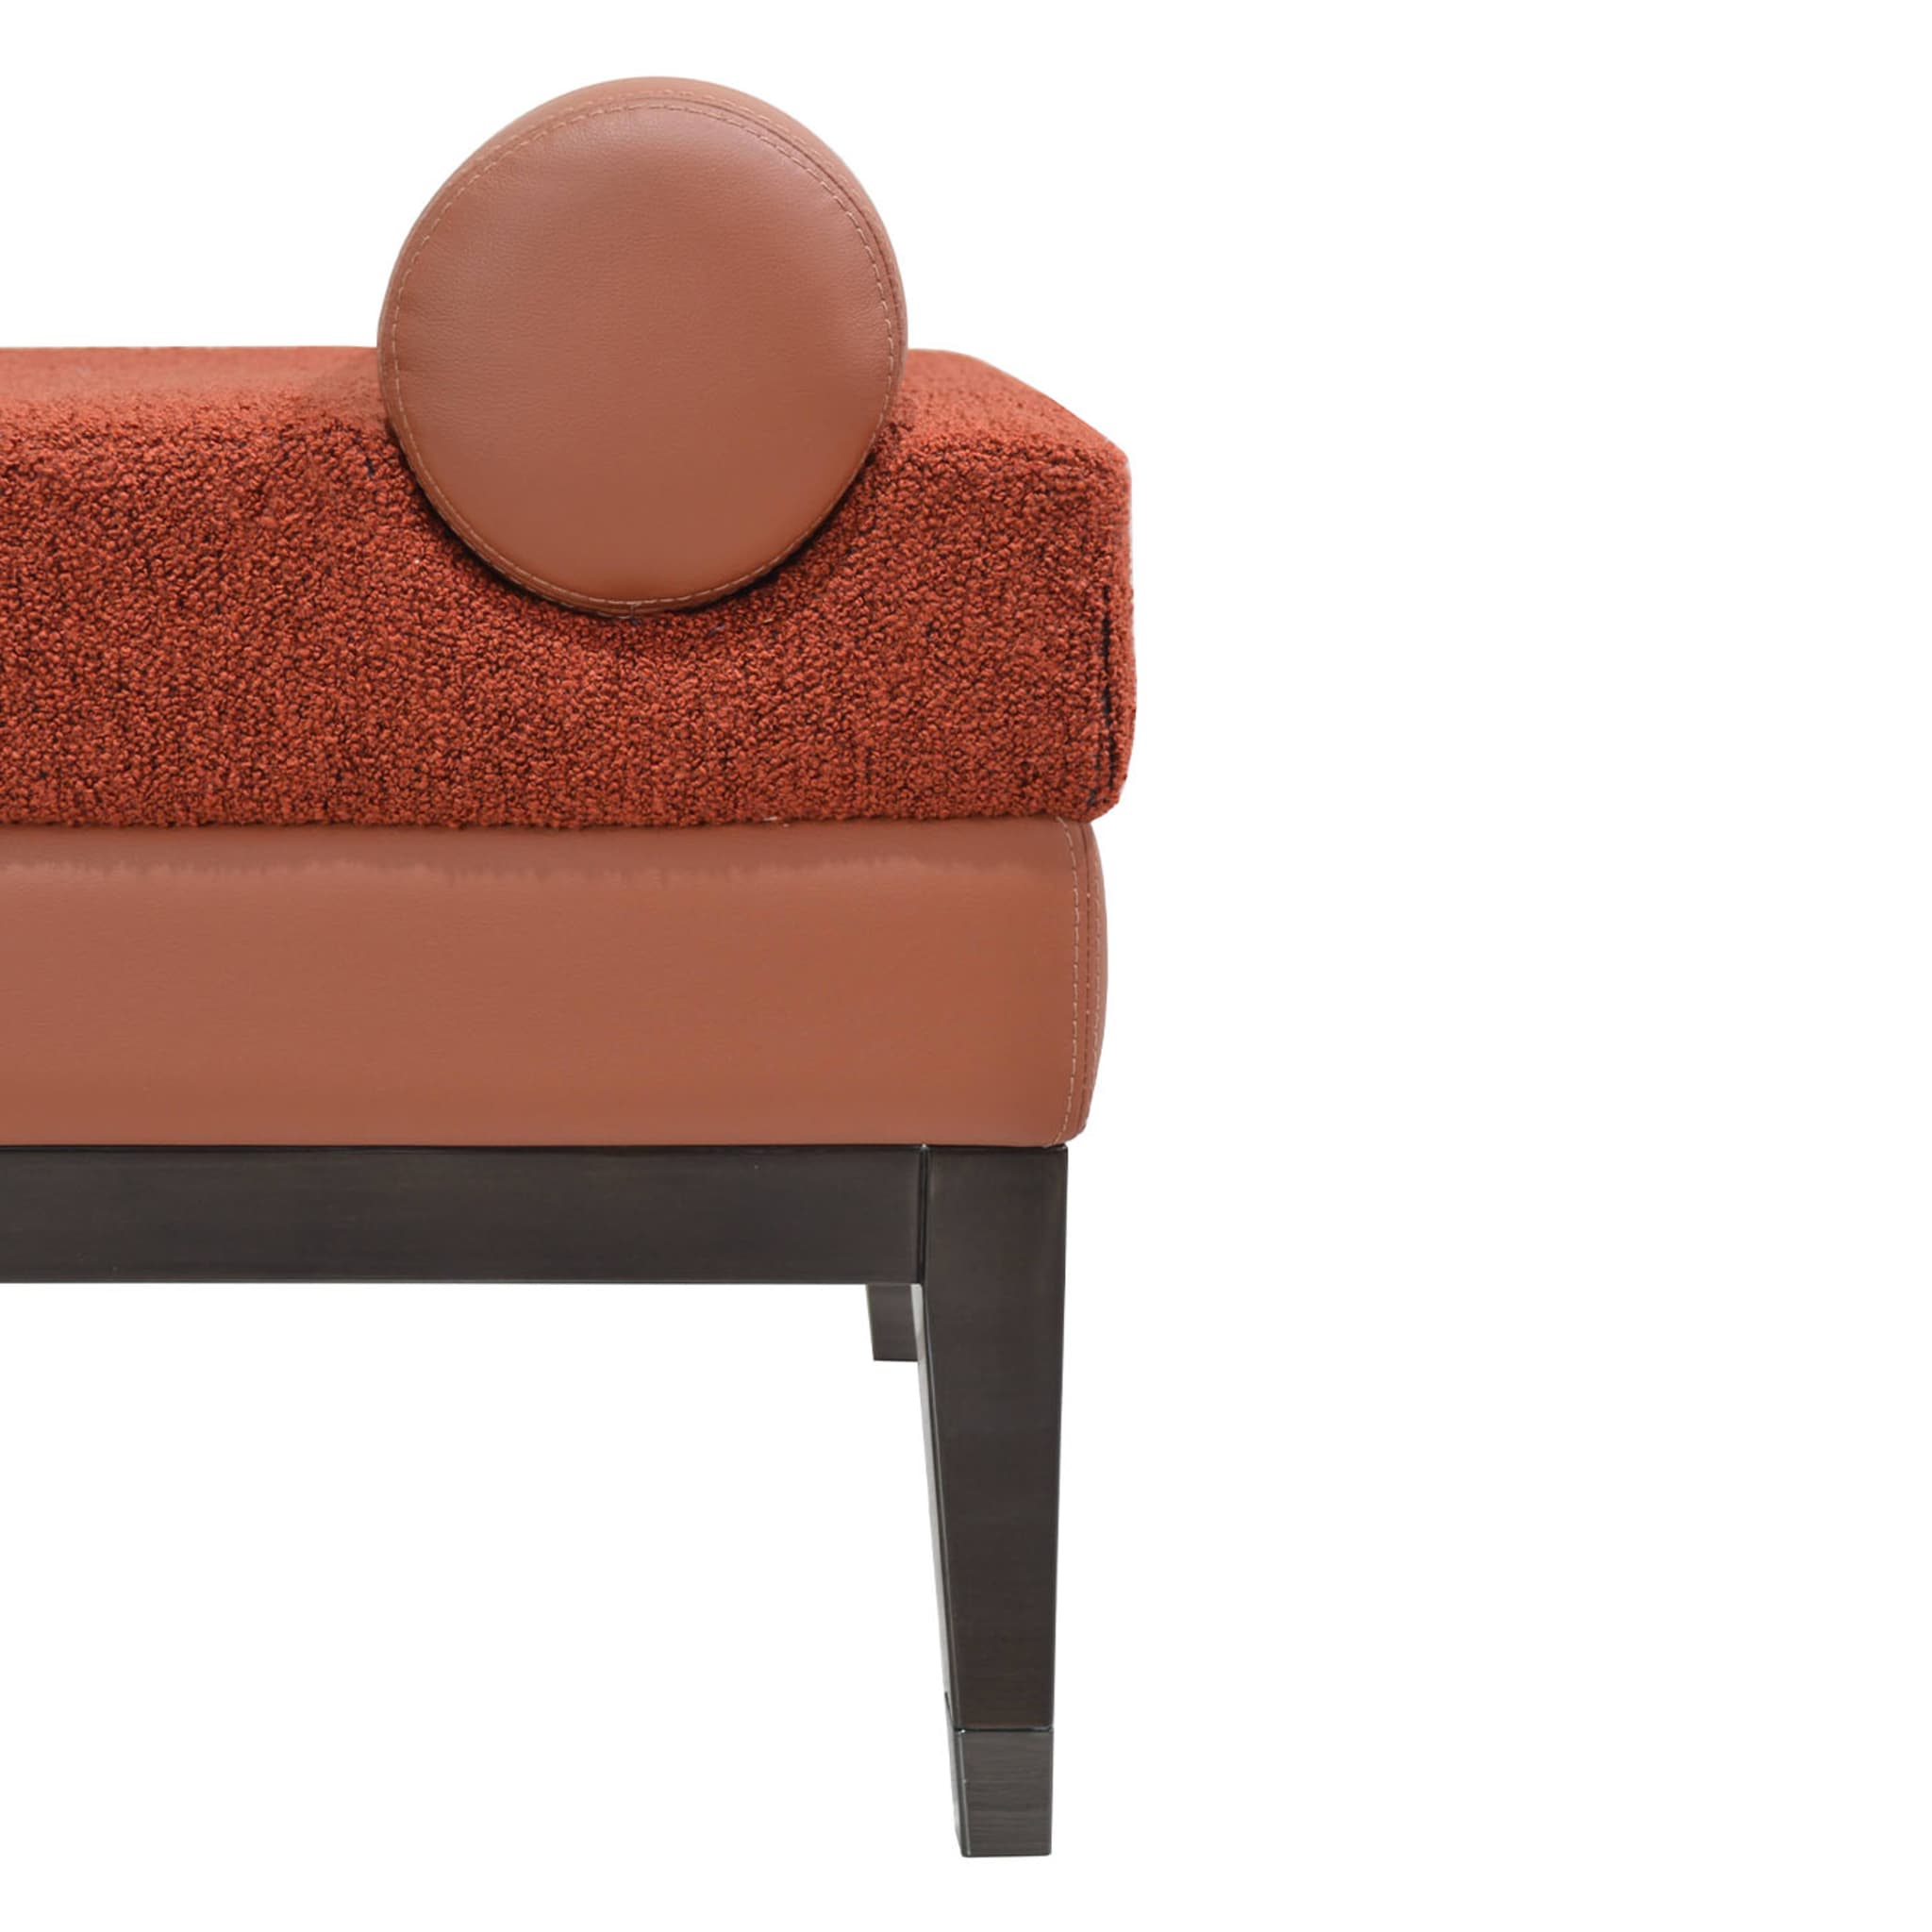 Italian Contemporary Upholstered Bench In Terracotta Fabric  - Alternative view 3